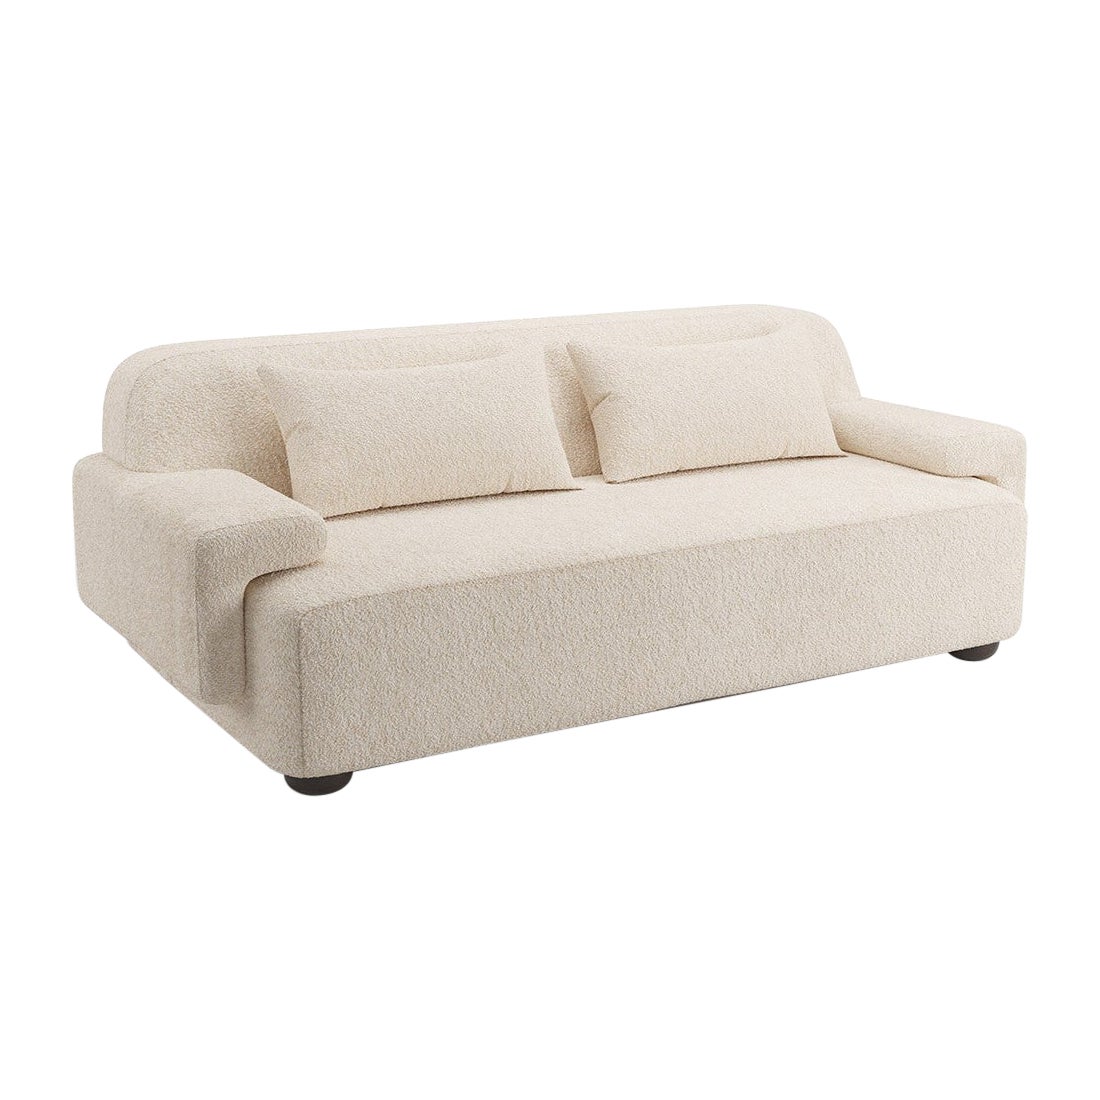 Popus Editions Lena 3 Seater Sofa in Natural Athena Loop Yarn Upholstery